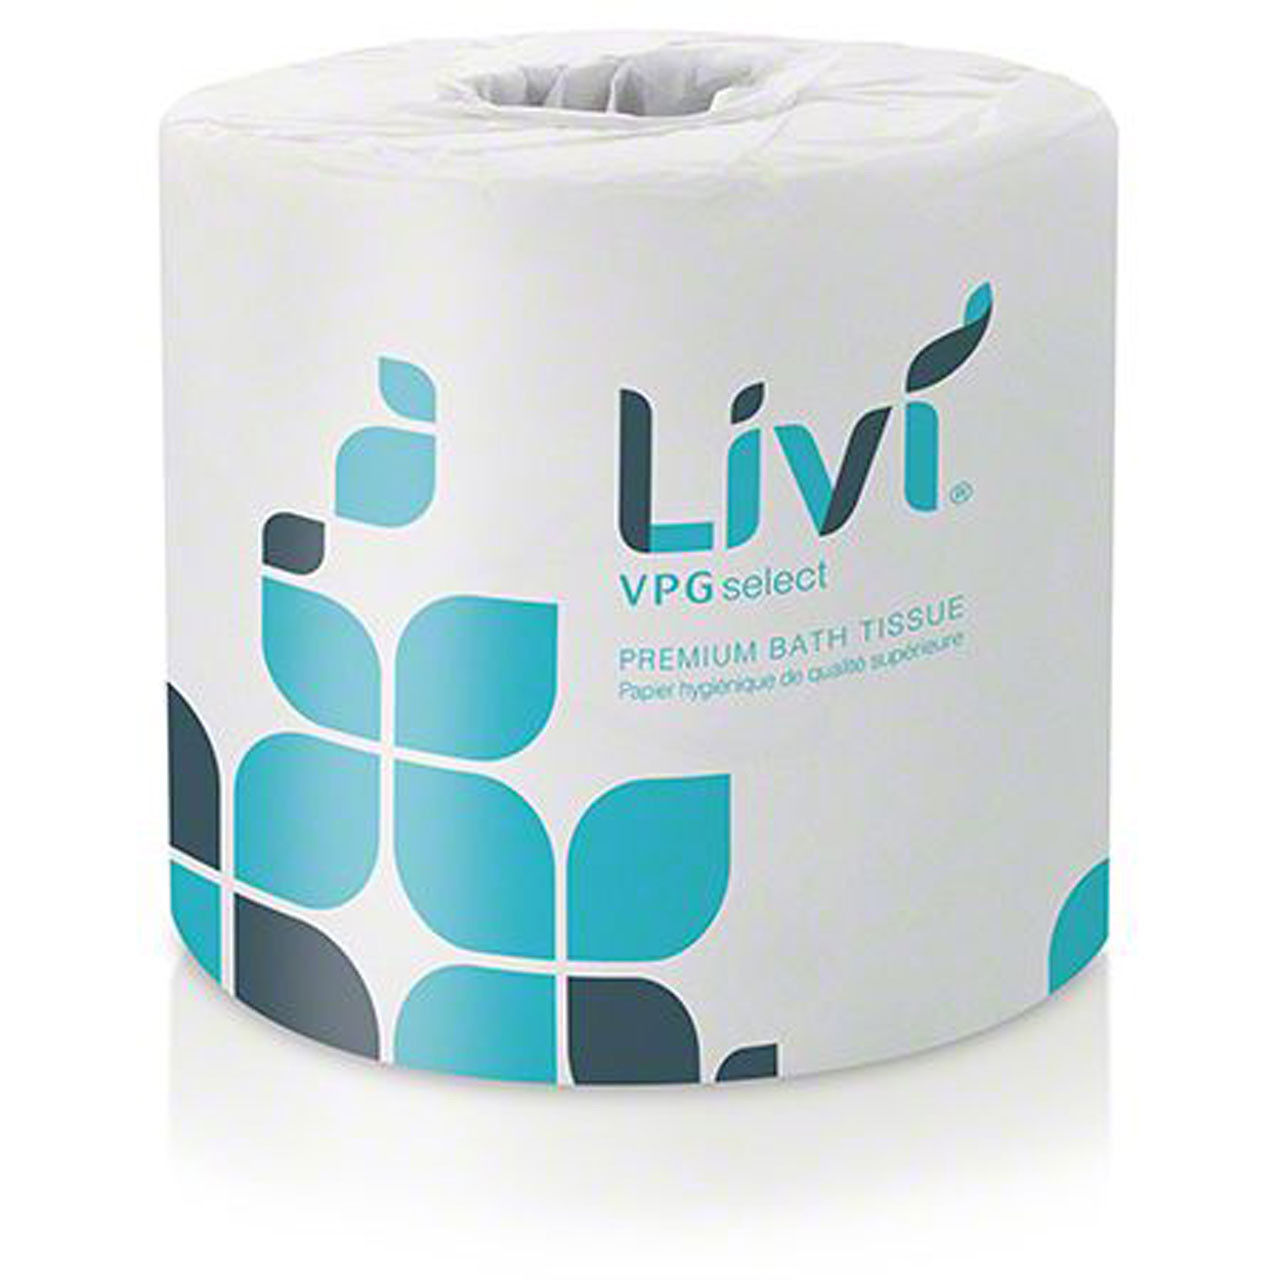 What is the size of each sheet of the Solaris Paper Livi VPG Select Toilet Tissue 2/ply?